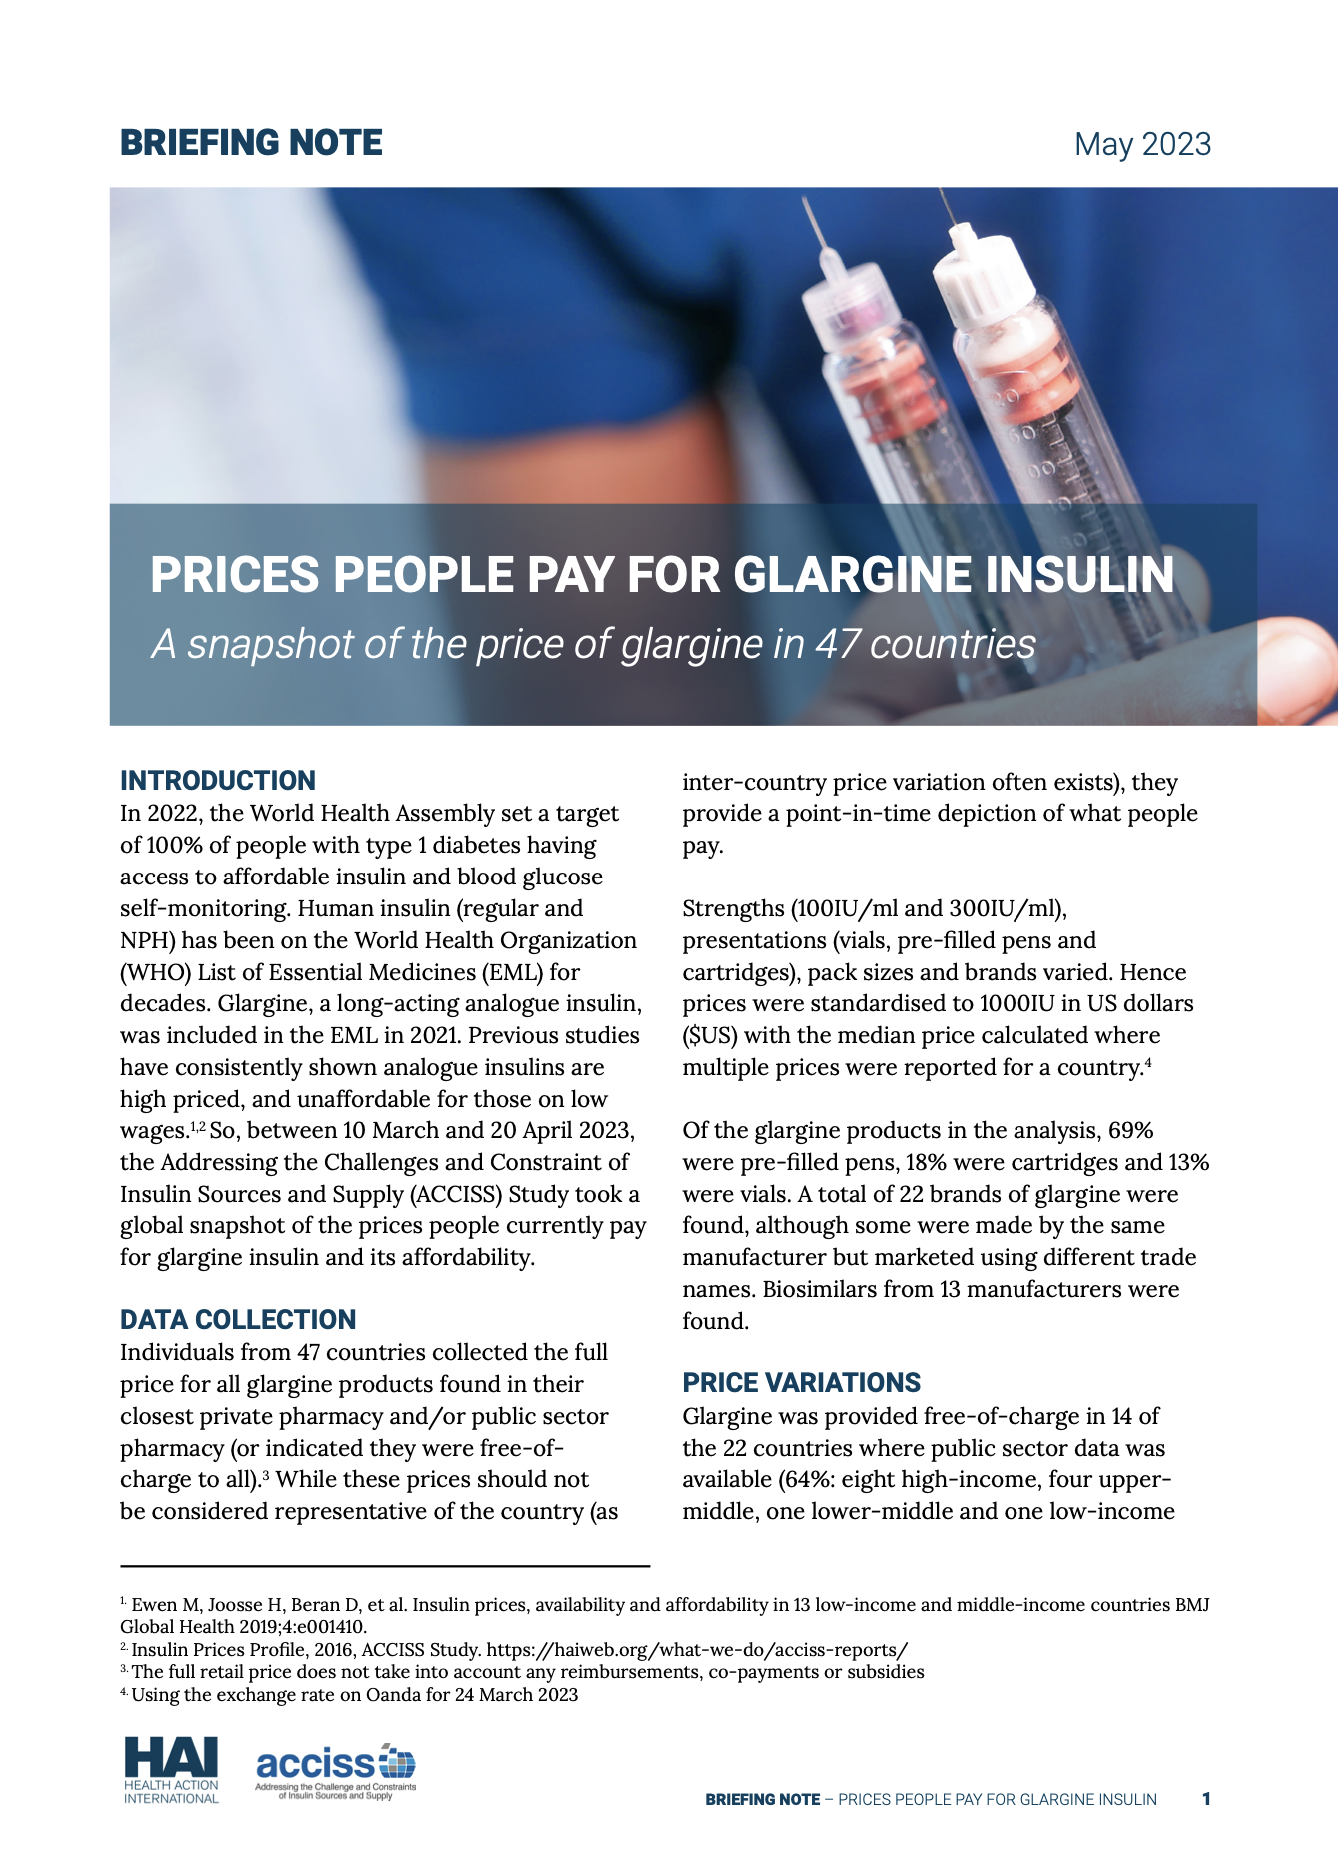 Prices People Pay for Glargine Insulin 